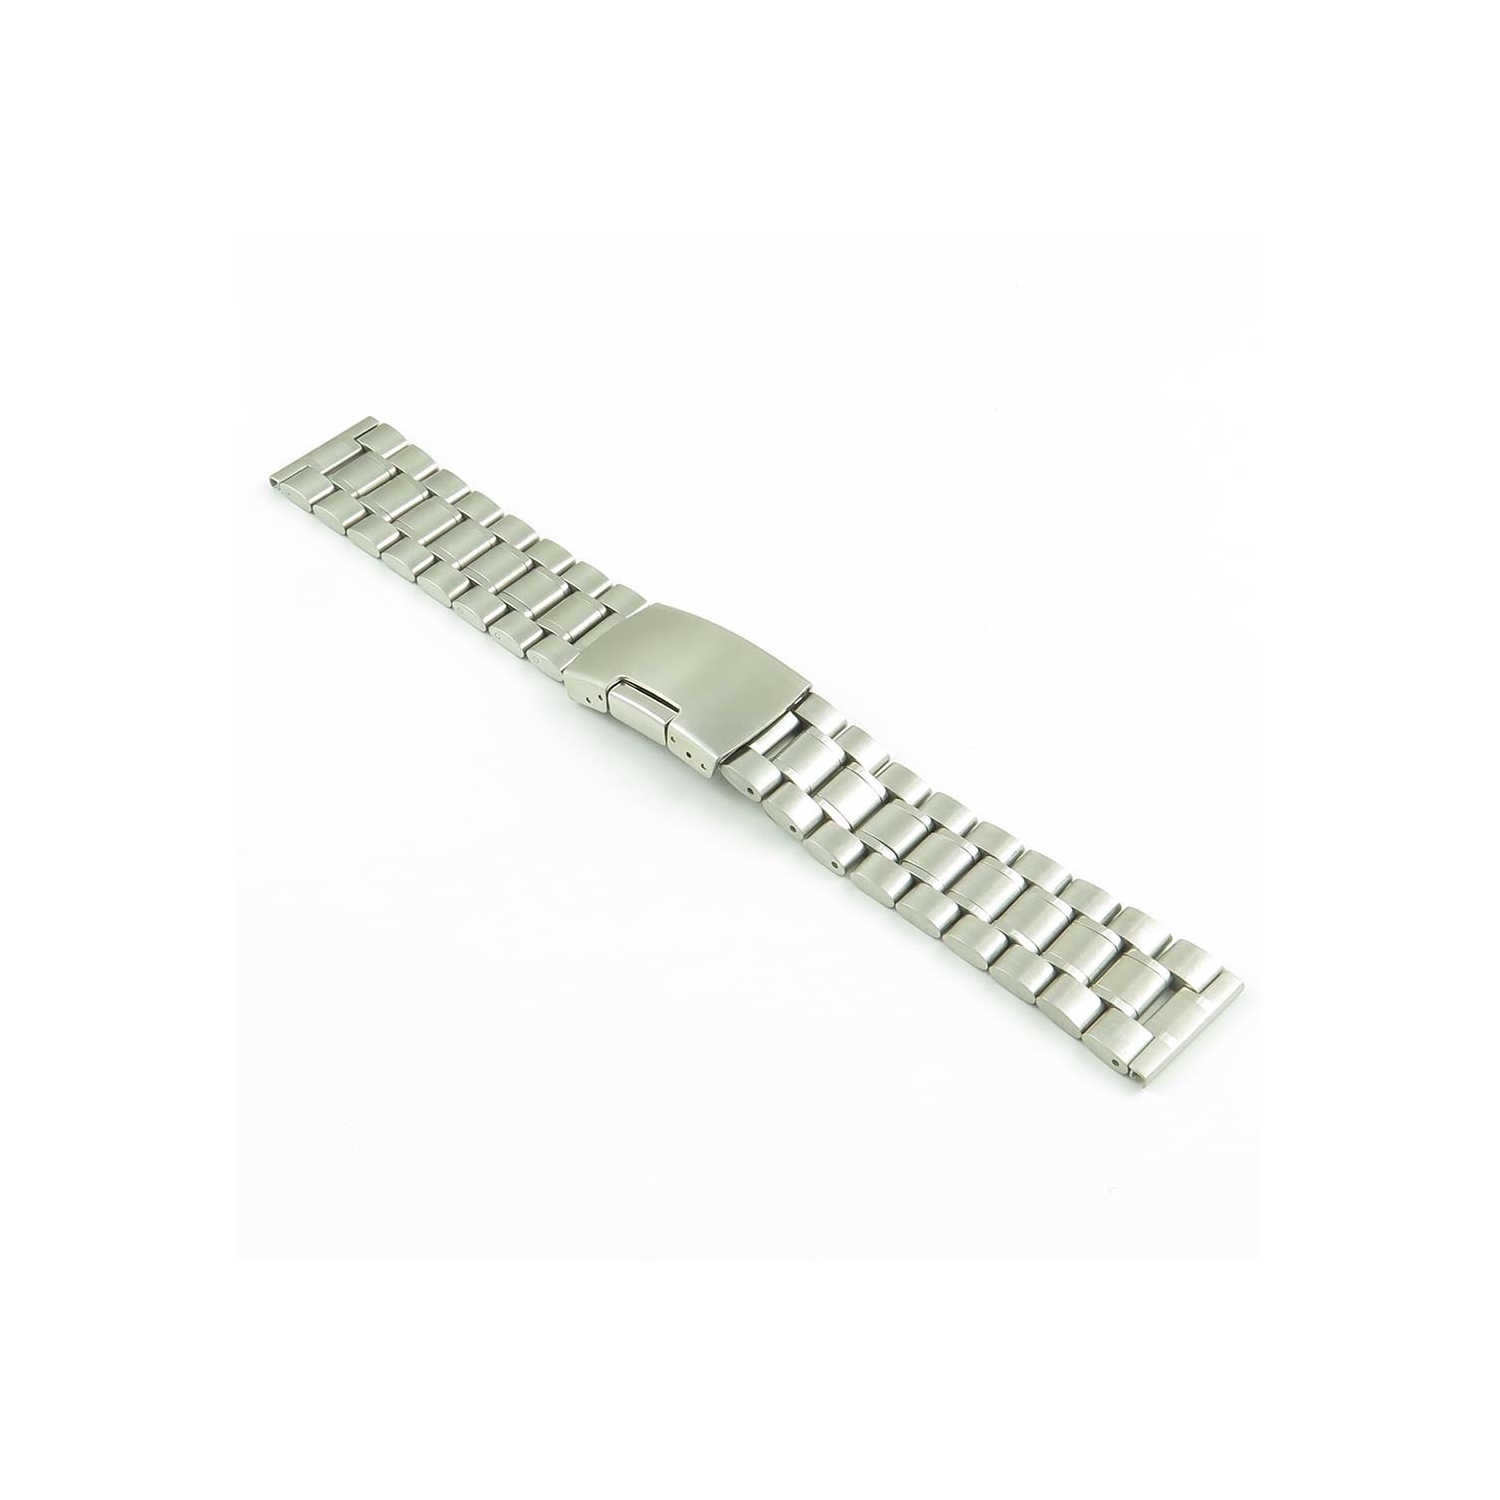 StrapsCo Stainless Steel Oyster Watch Band Strap for Fossil Gen 4 Smartwatch - 18mm - Silver